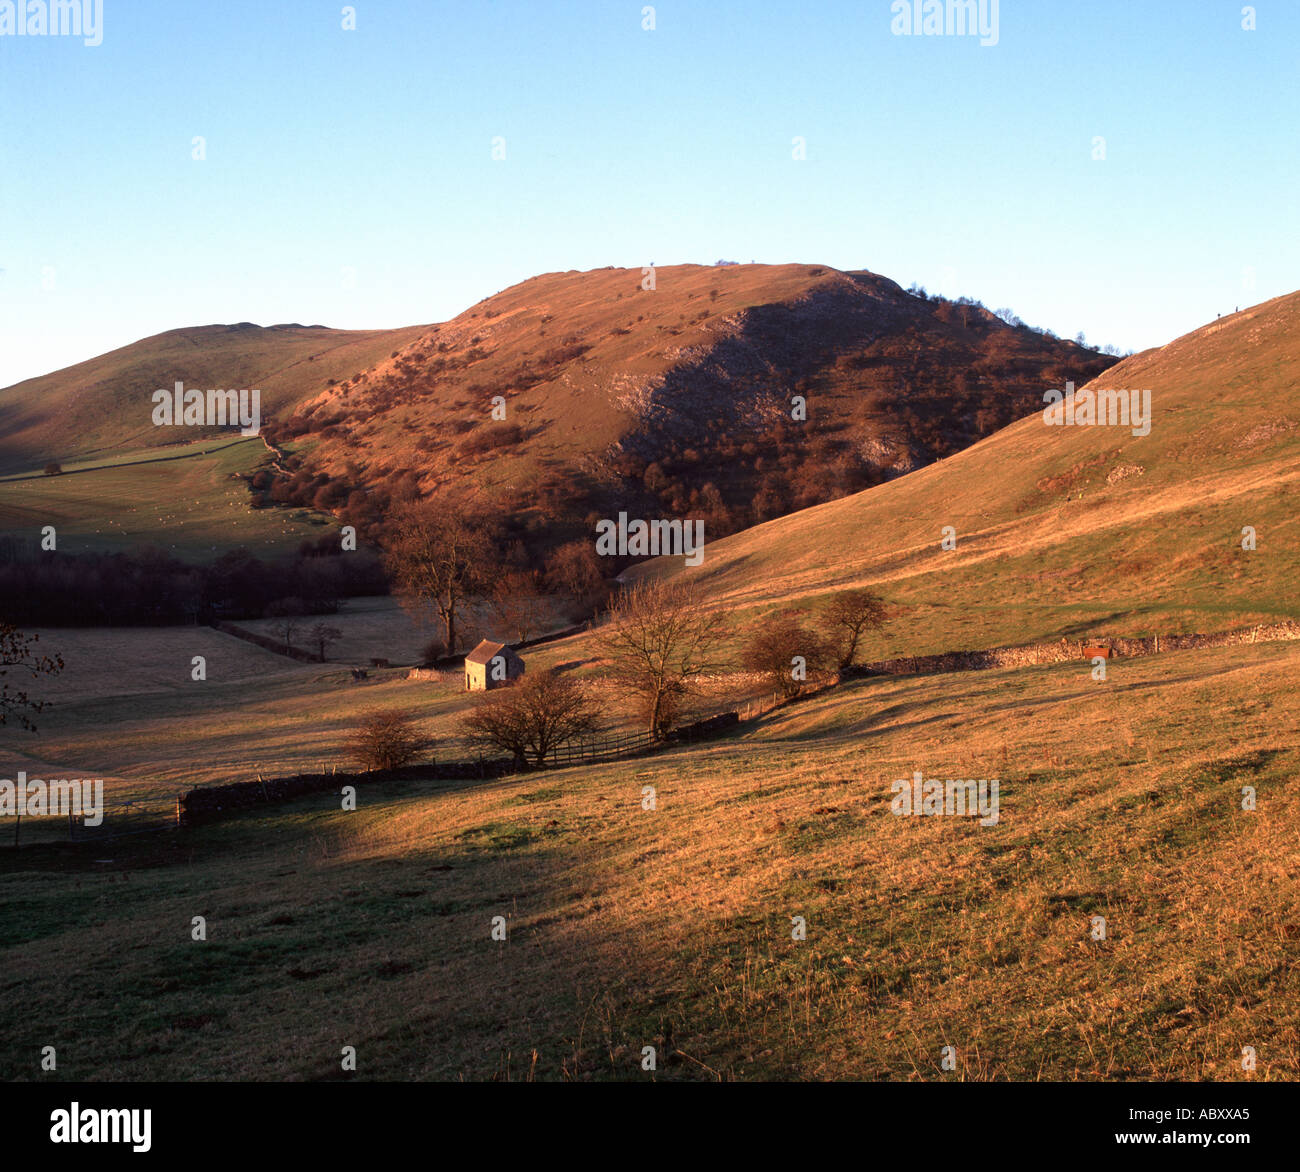 Bunster Hill and the entrance to Dovedale from the slopes of Thorpe Cloud in England's Peak District National Park Stock Photo